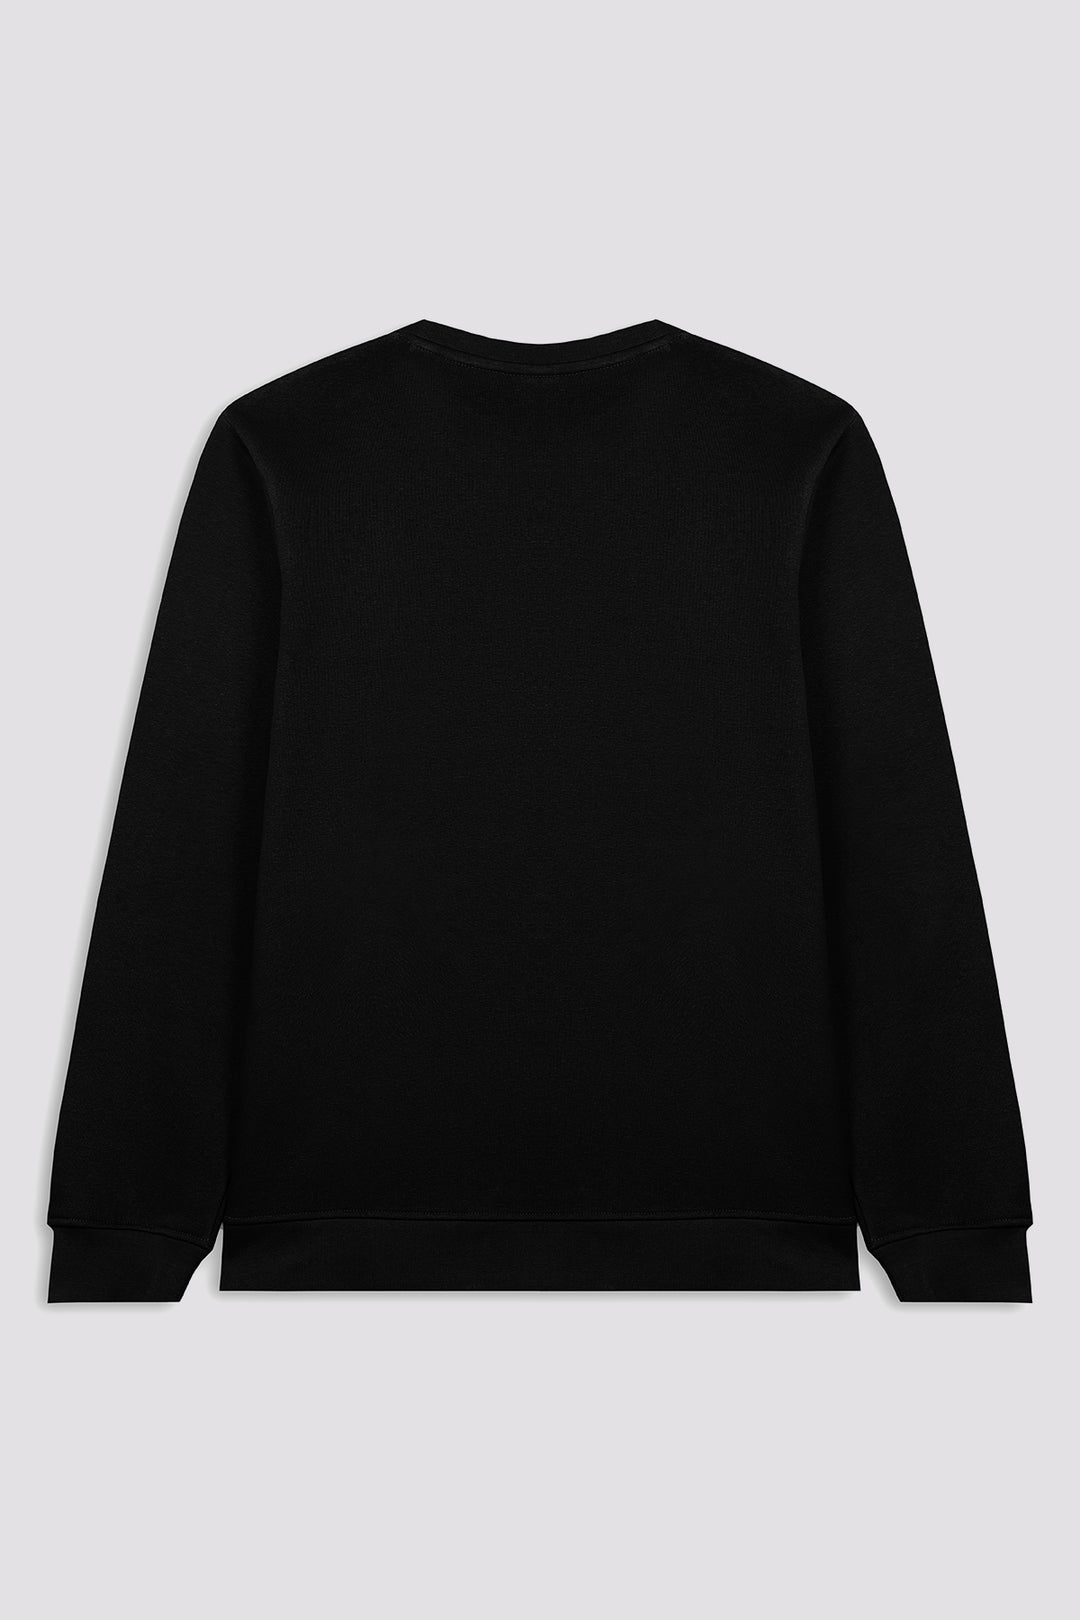 Unstoppable Embroidered Black Sweatshirt (Plus Size) - W22 - USW009P